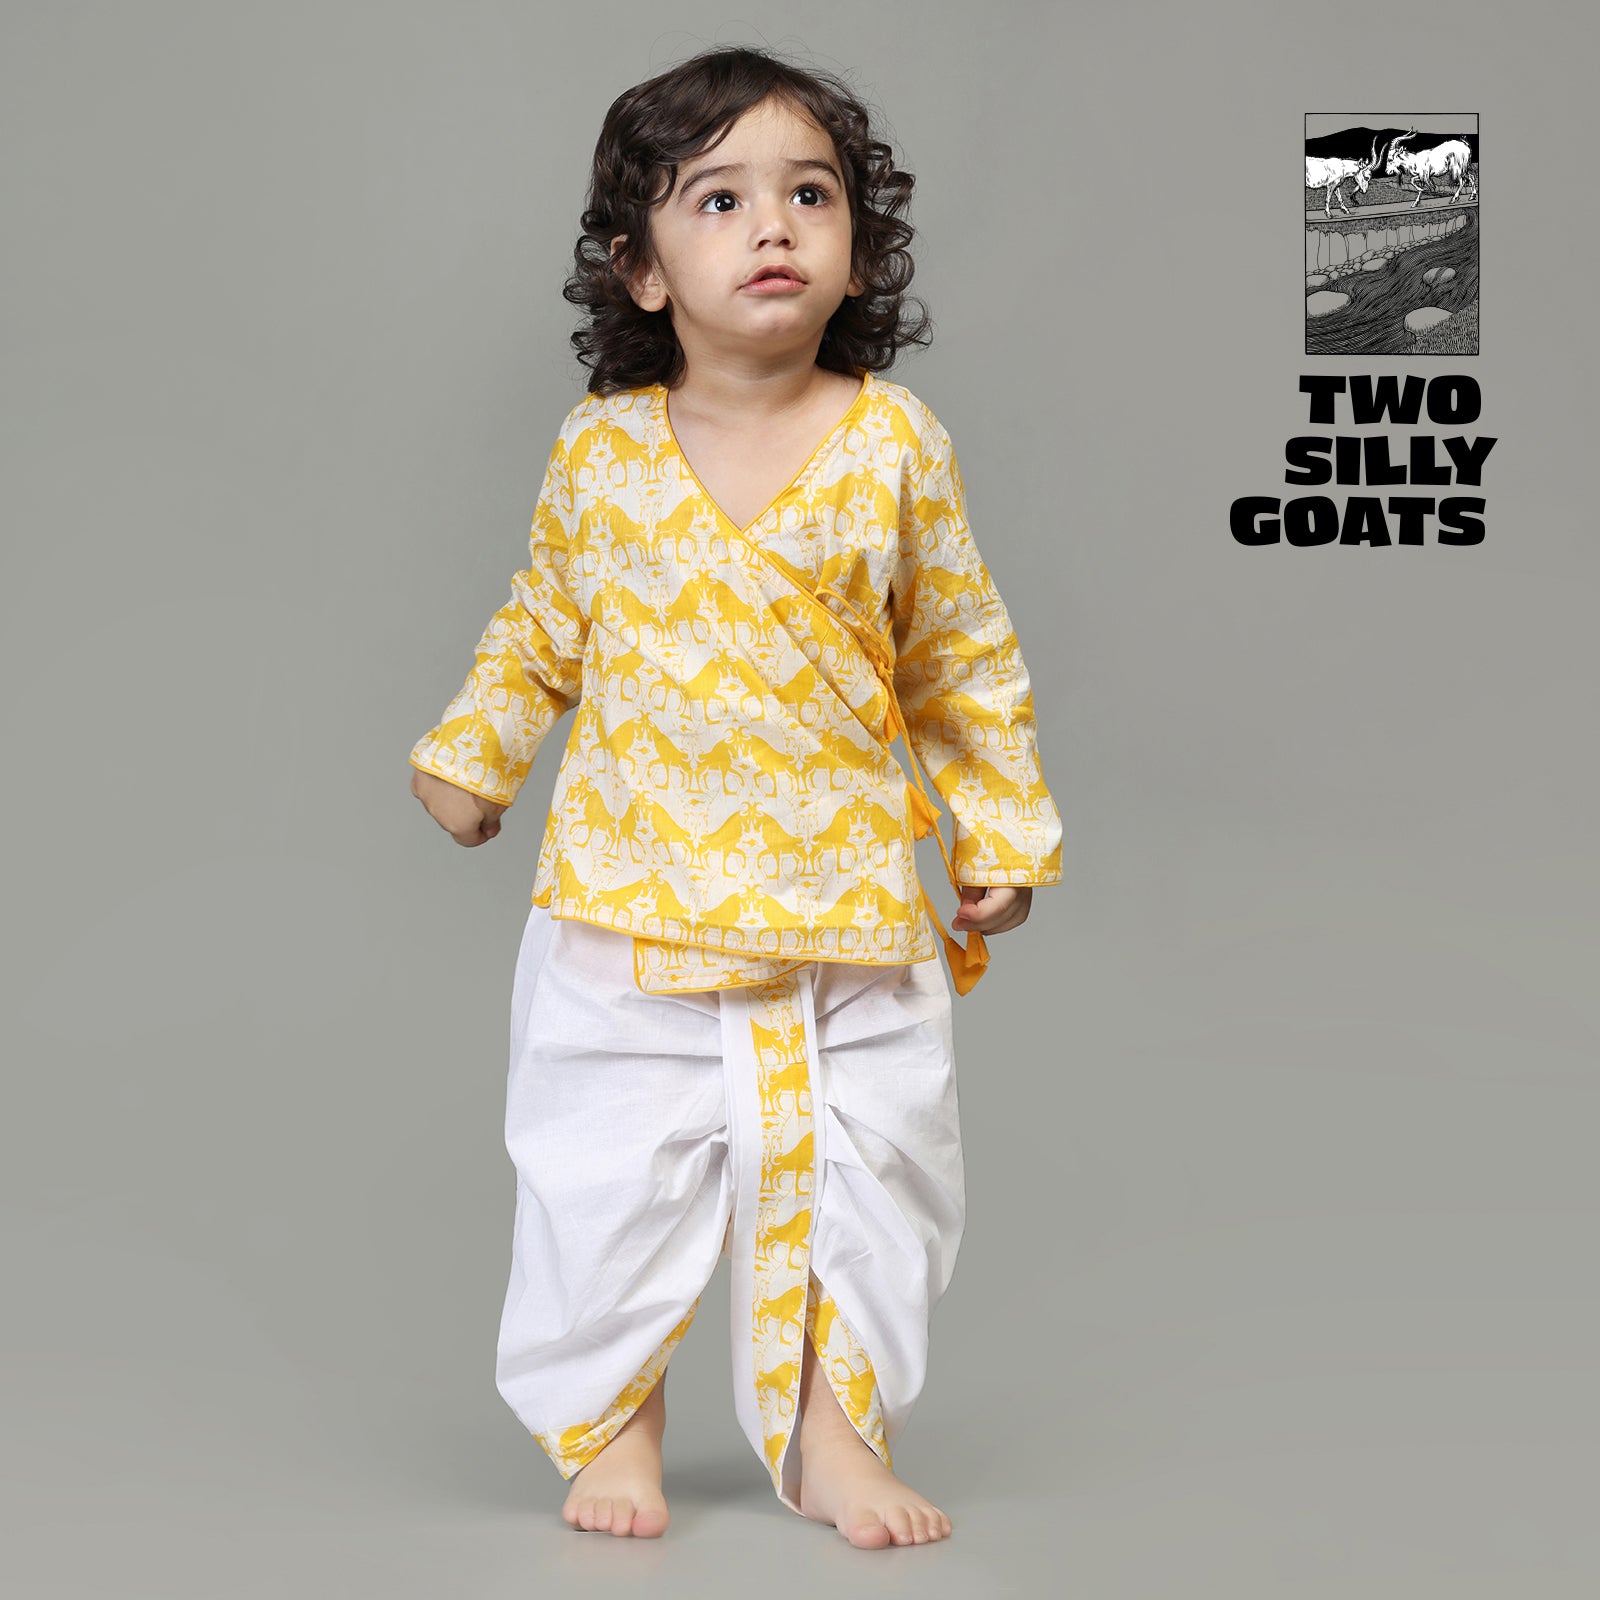 Cotton Angarakha & Dhoti Set For Boys with Two Silly Goats Print